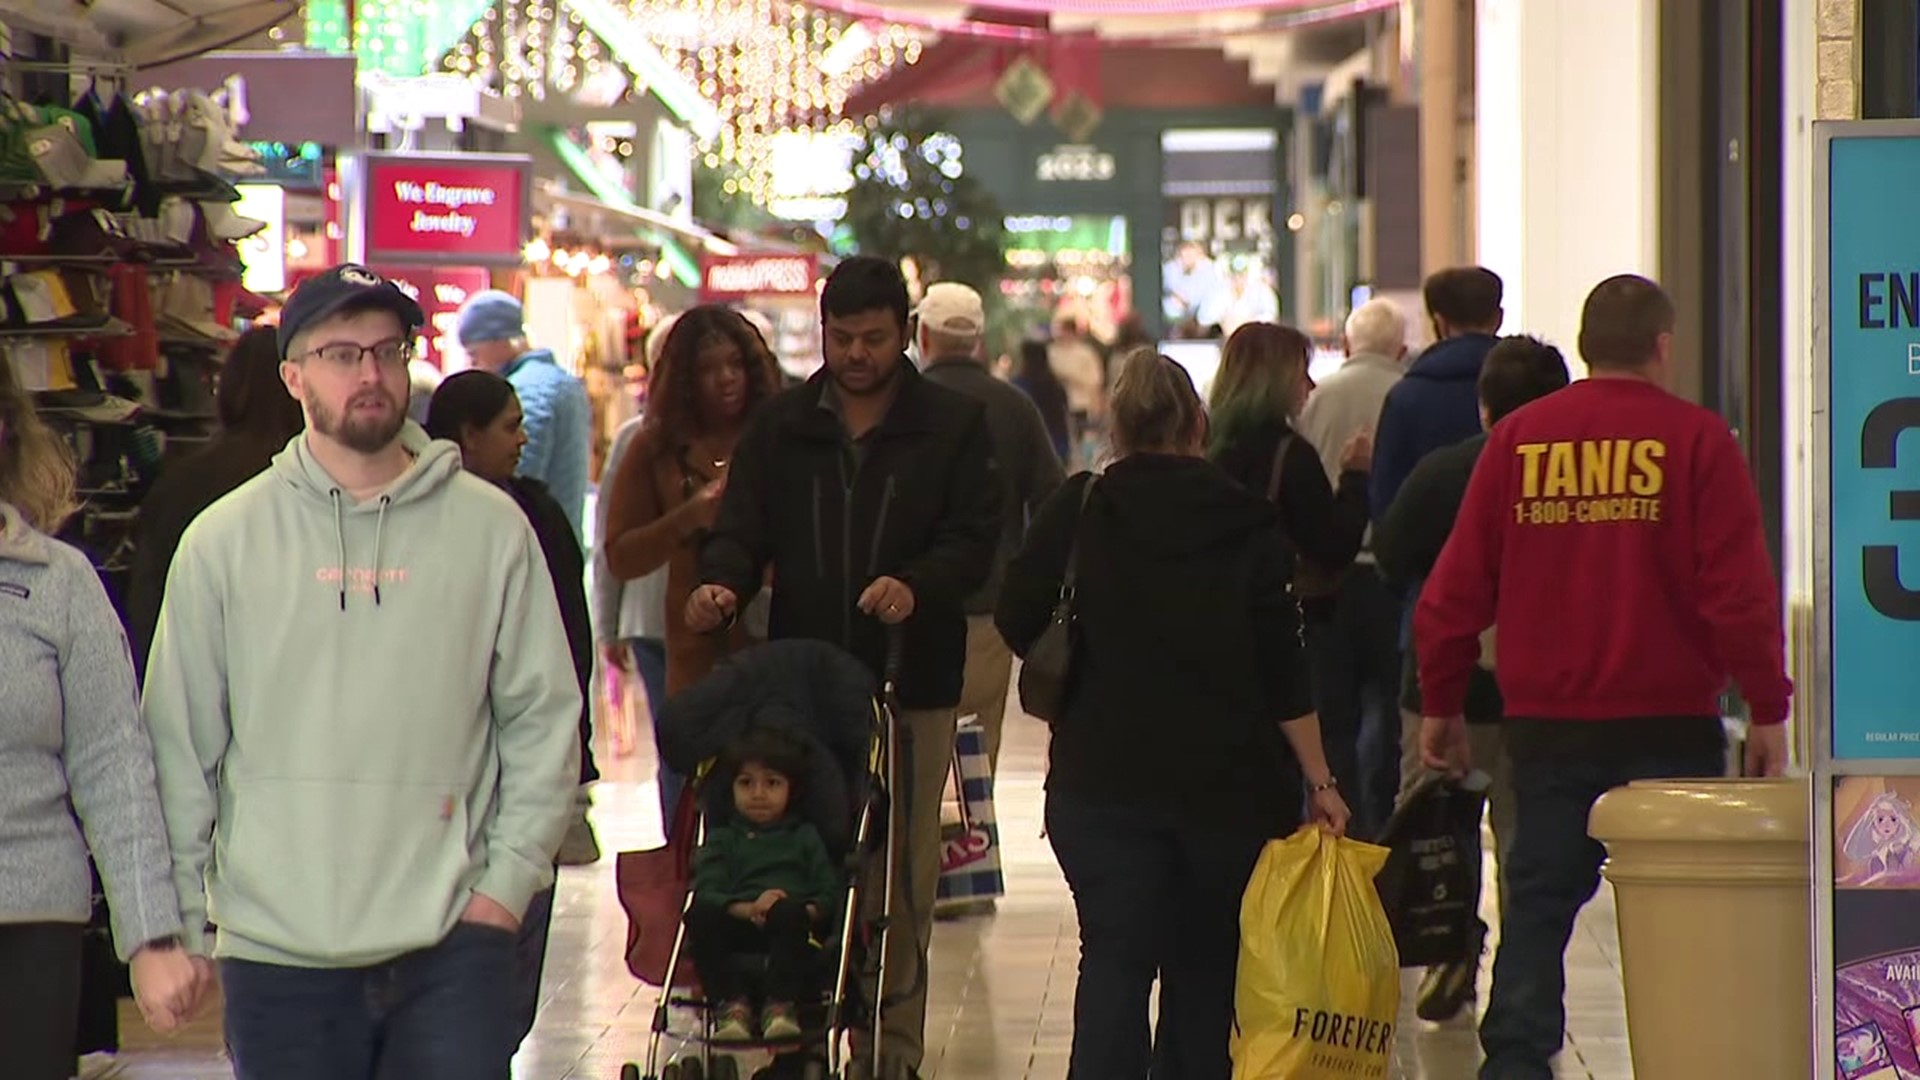 Newswatch 16's Courtney Harrison spoke with shoppers about what brought them out on Tuesday.